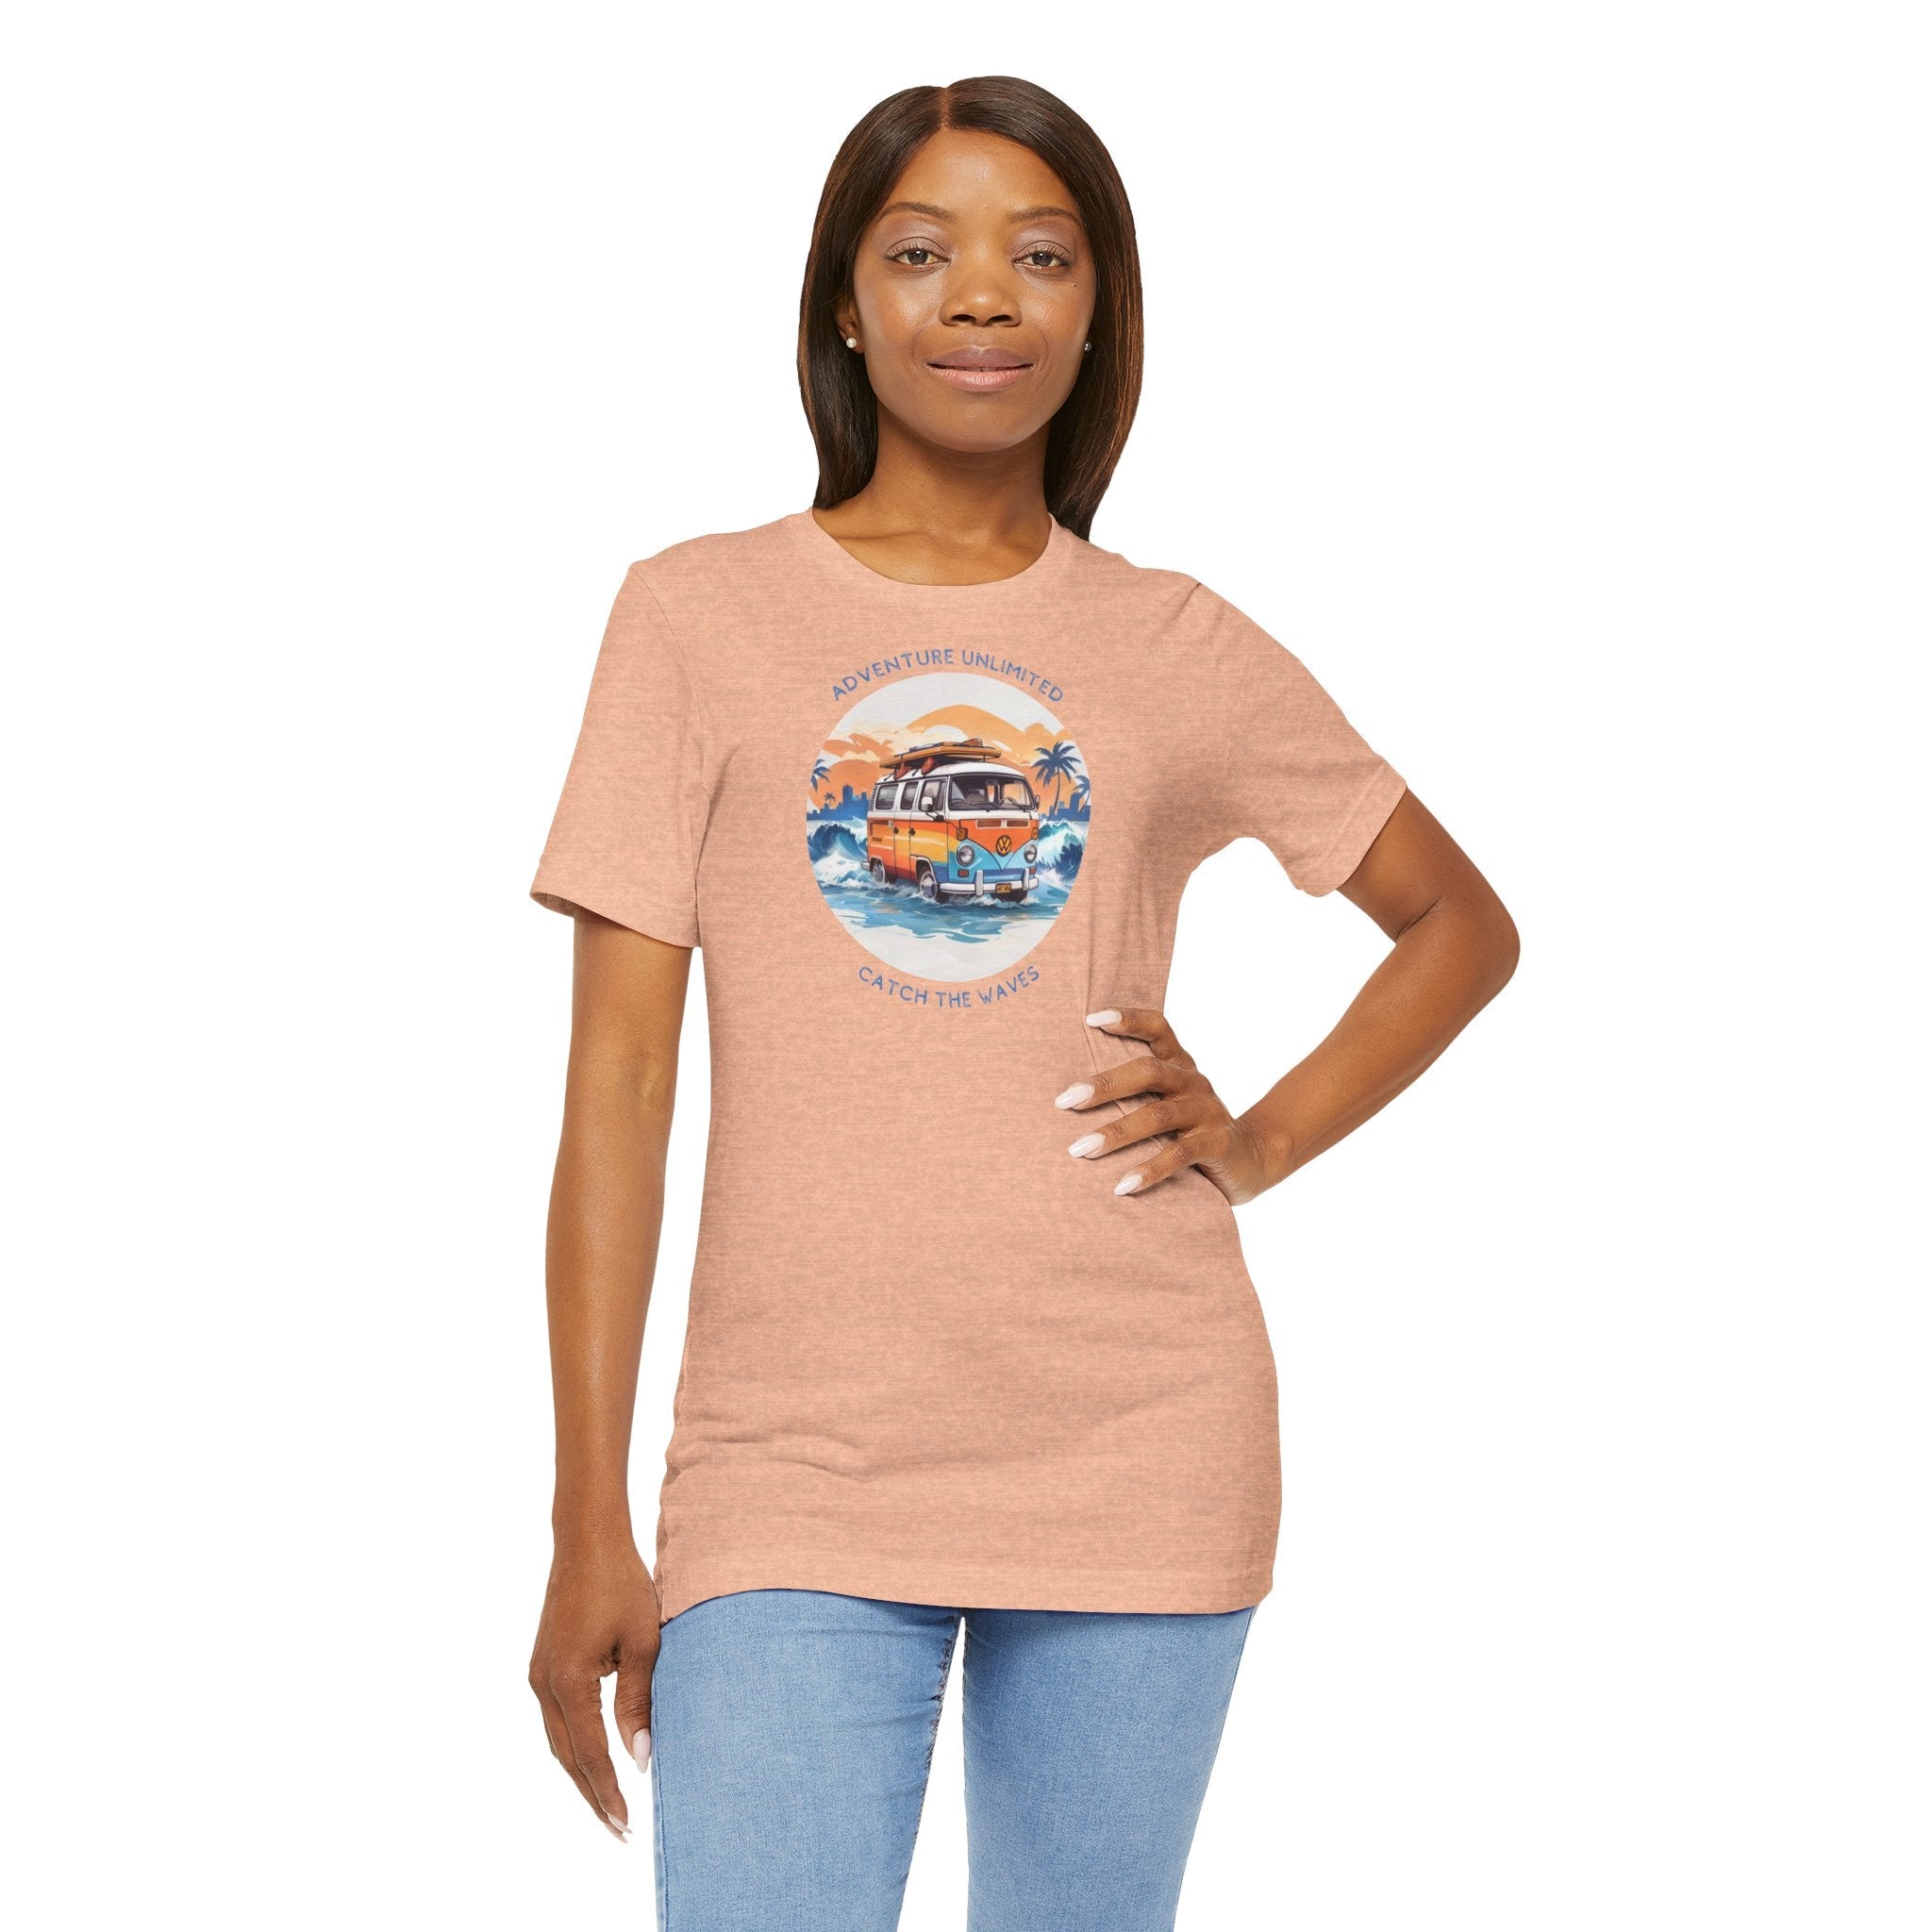 Adventure Unlimited Surfing T-Shirt: woman in peach tee with ’the best day is a day’ - direct-to-garment printed item